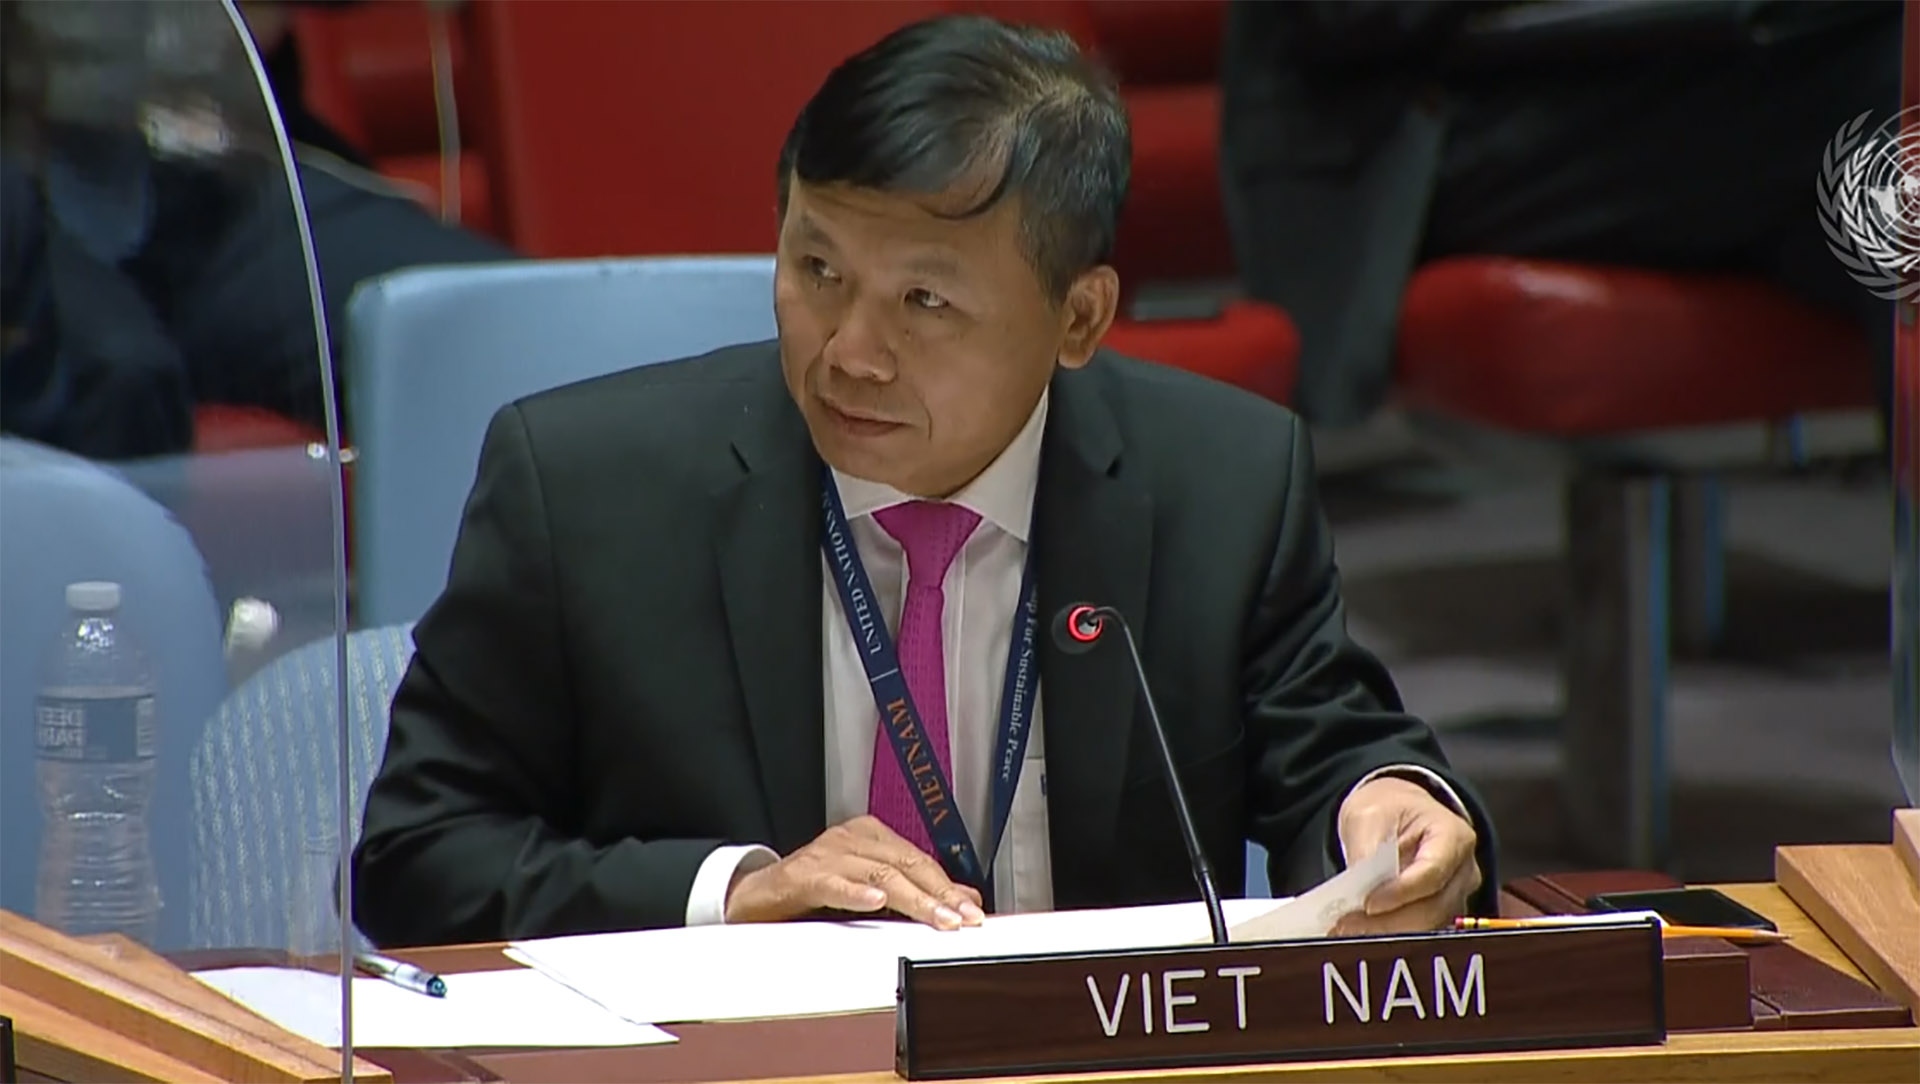 Vietnam calls for efforts to ensure safety for civilians in Afghanistan